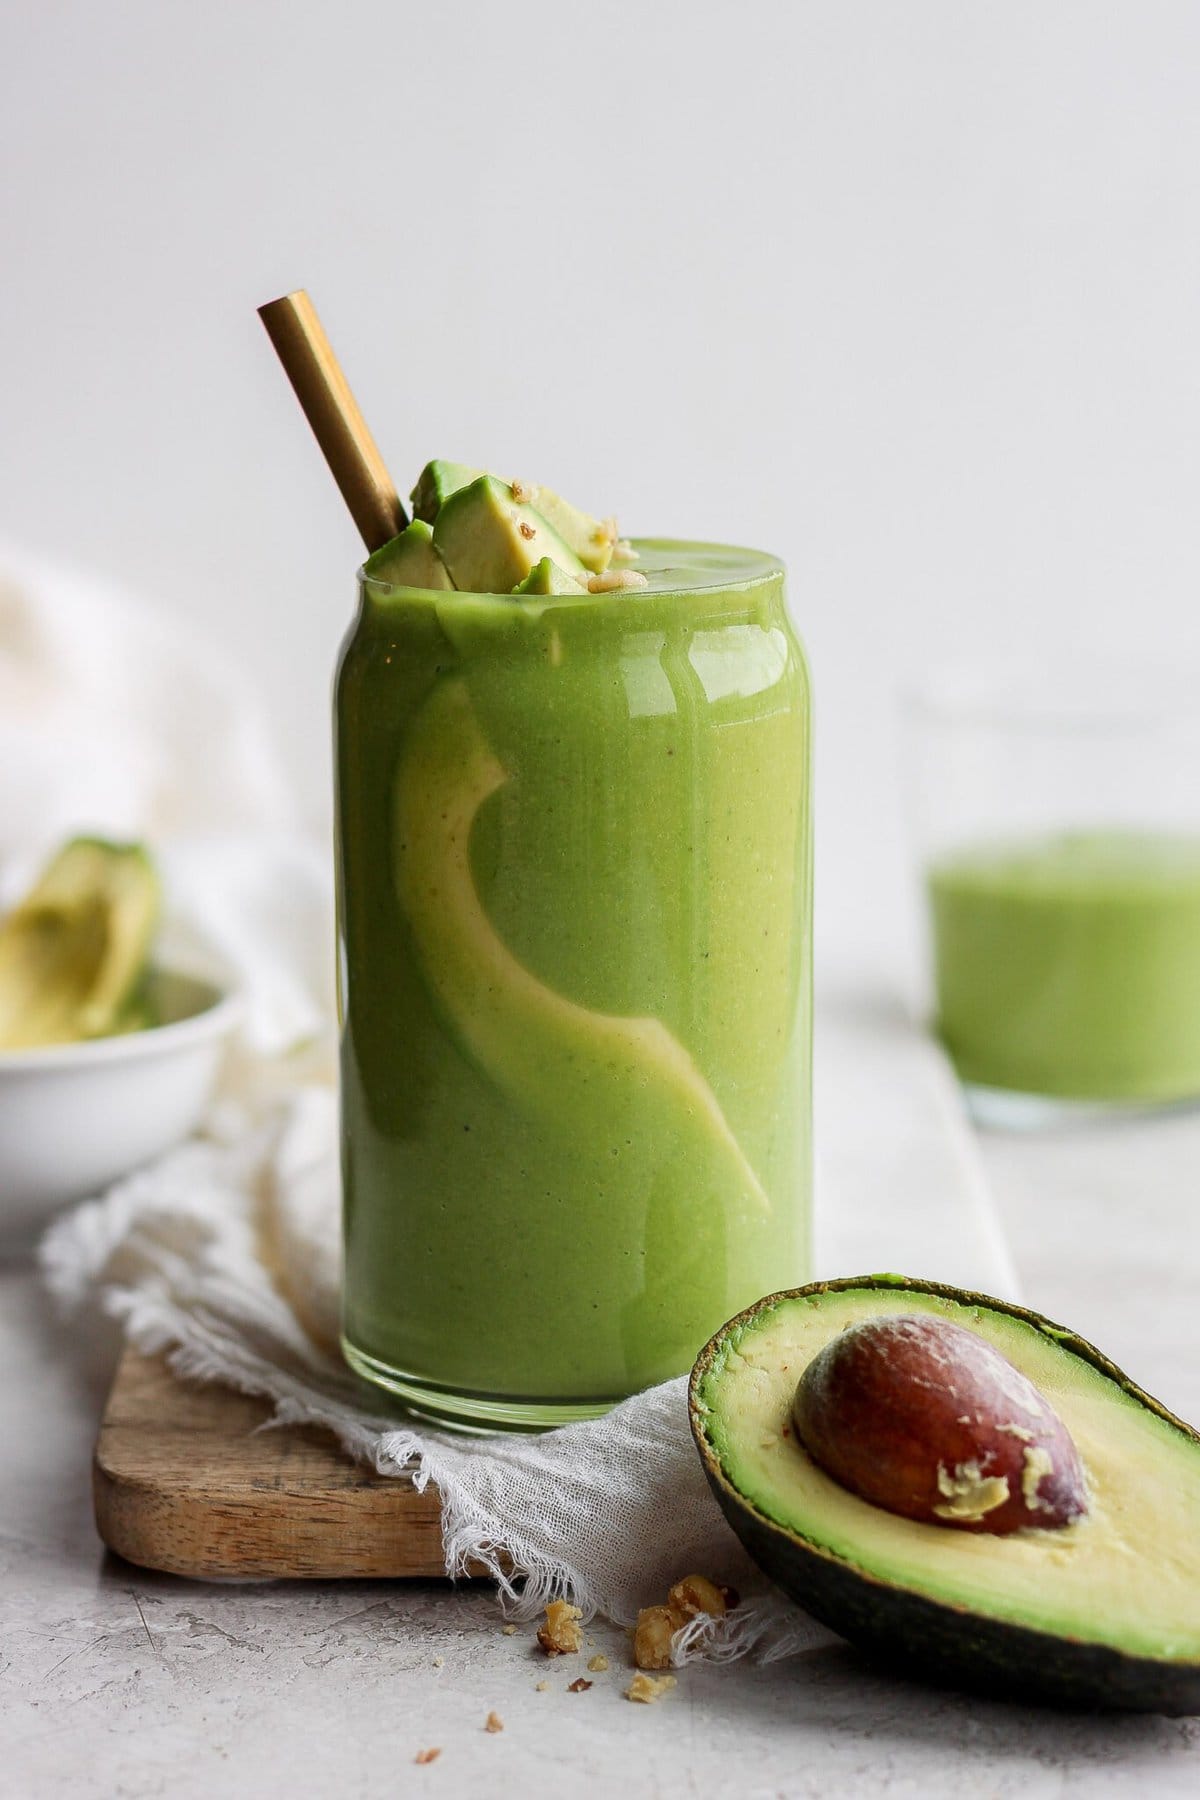 Is Avocado Good In Juice From Cilegon?